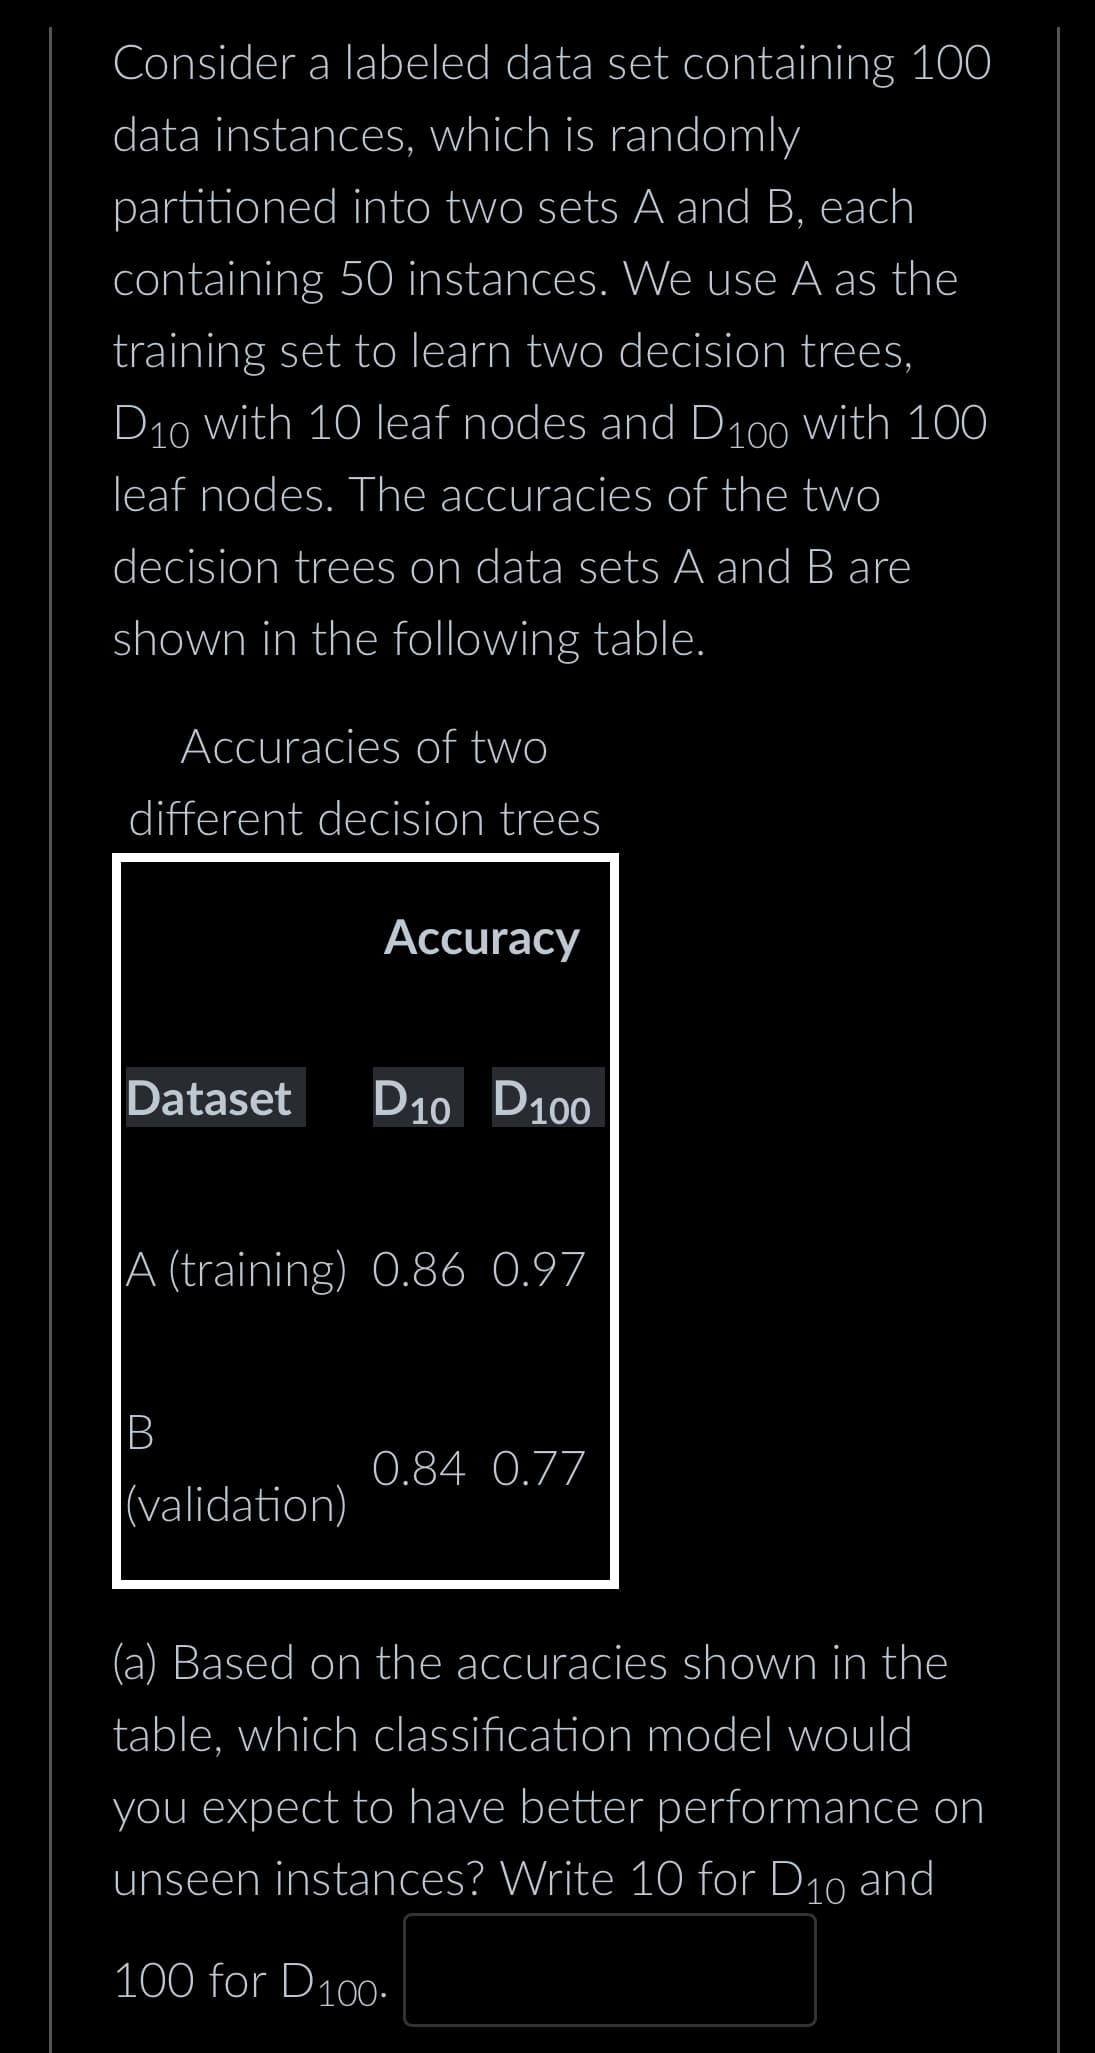 Consider a labeled data set containing 100
data instances, which is randomly
partitioned into two sets A and B, each
containing 50 instances. We use A as the
training set to learn two decision trees,
D10 with 10 leaf nodes and D100 with 100
leaf nodes. The accuracies of the two
decision trees on data sets A and B are
shown in the following table.
Accuracies of two
different decision trees
Dataset
B
Accuracy
A (training) 0.86 0.97
(validation)
D10 D100
0.84 0.77
(a) Based on the accuracies shown in the
table, which classification model would
you expect to have better performance on
unseen instances? Write 10 for D₁0 and
100 for D100.